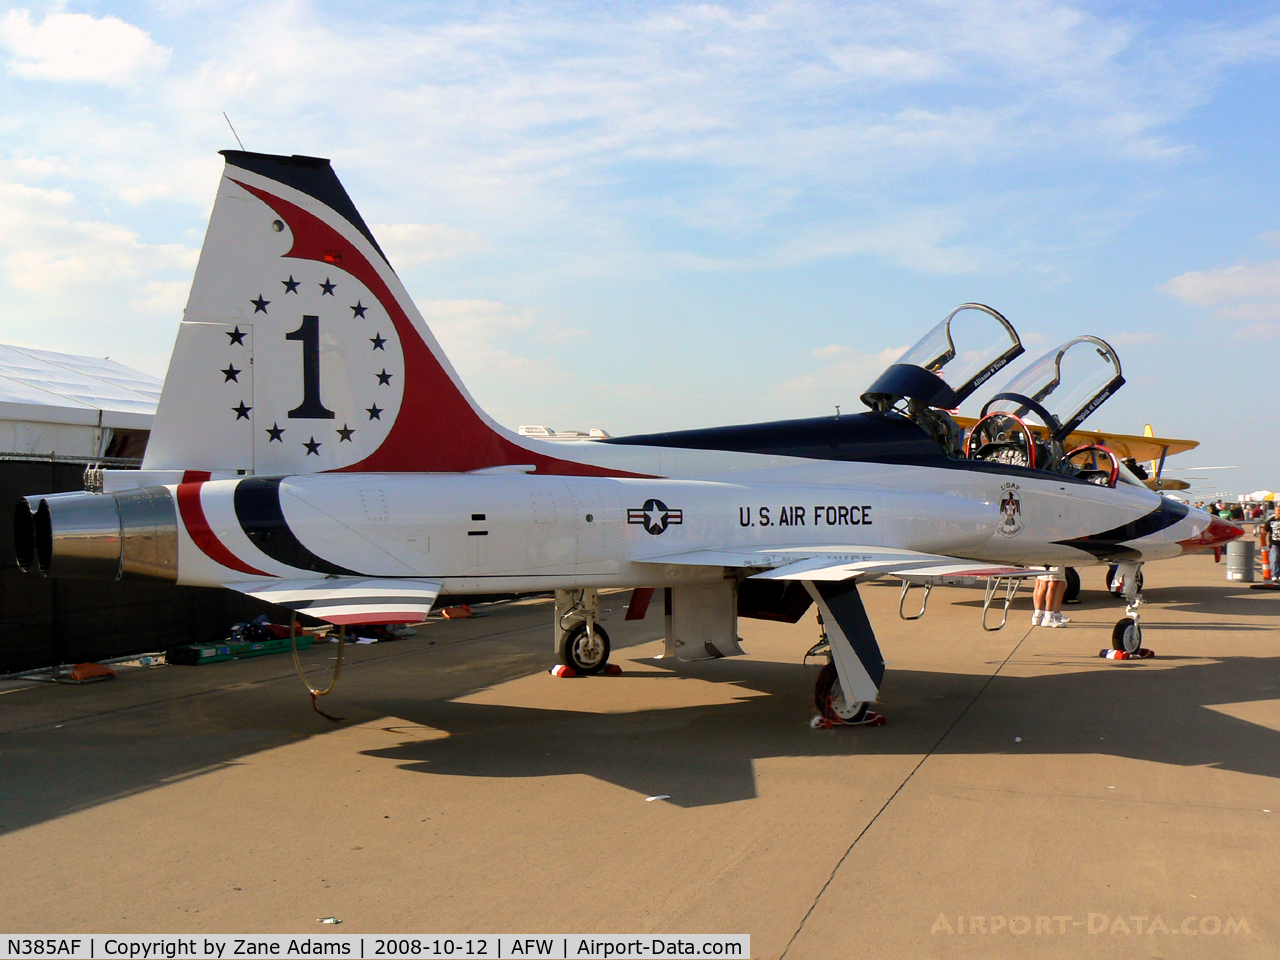 N385AF, 1964 Northrop T-38 C/N 45678, At the 2008 Alliance Airshow - Ross Perot Jr.'s T-38